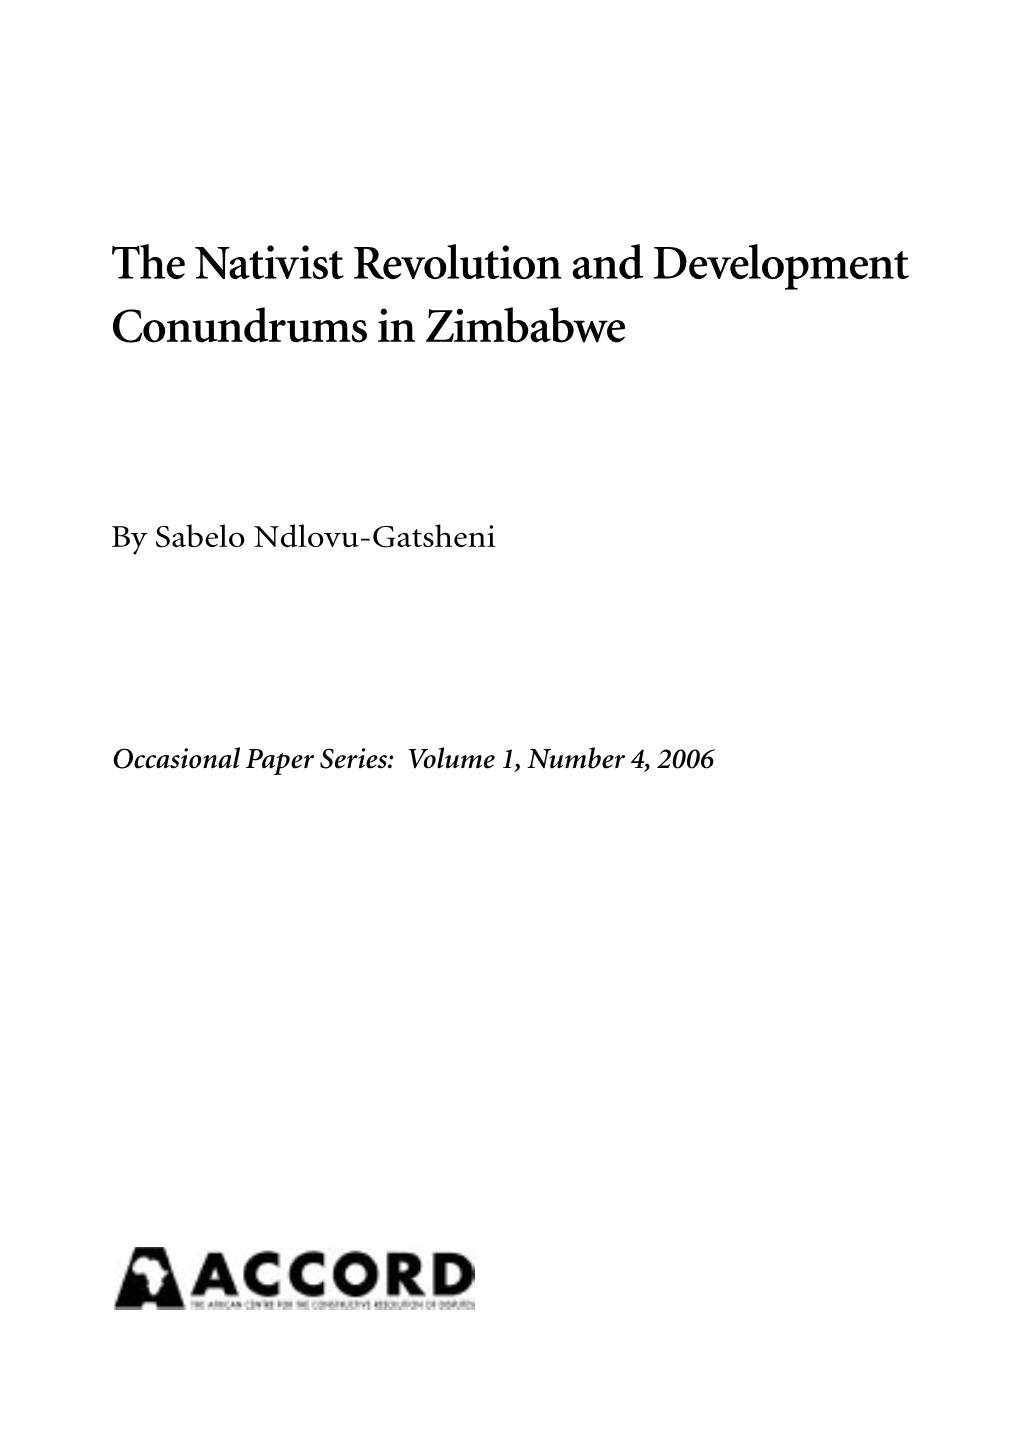 The Nativist Revolution and Development Conundrums in Zimbabwe